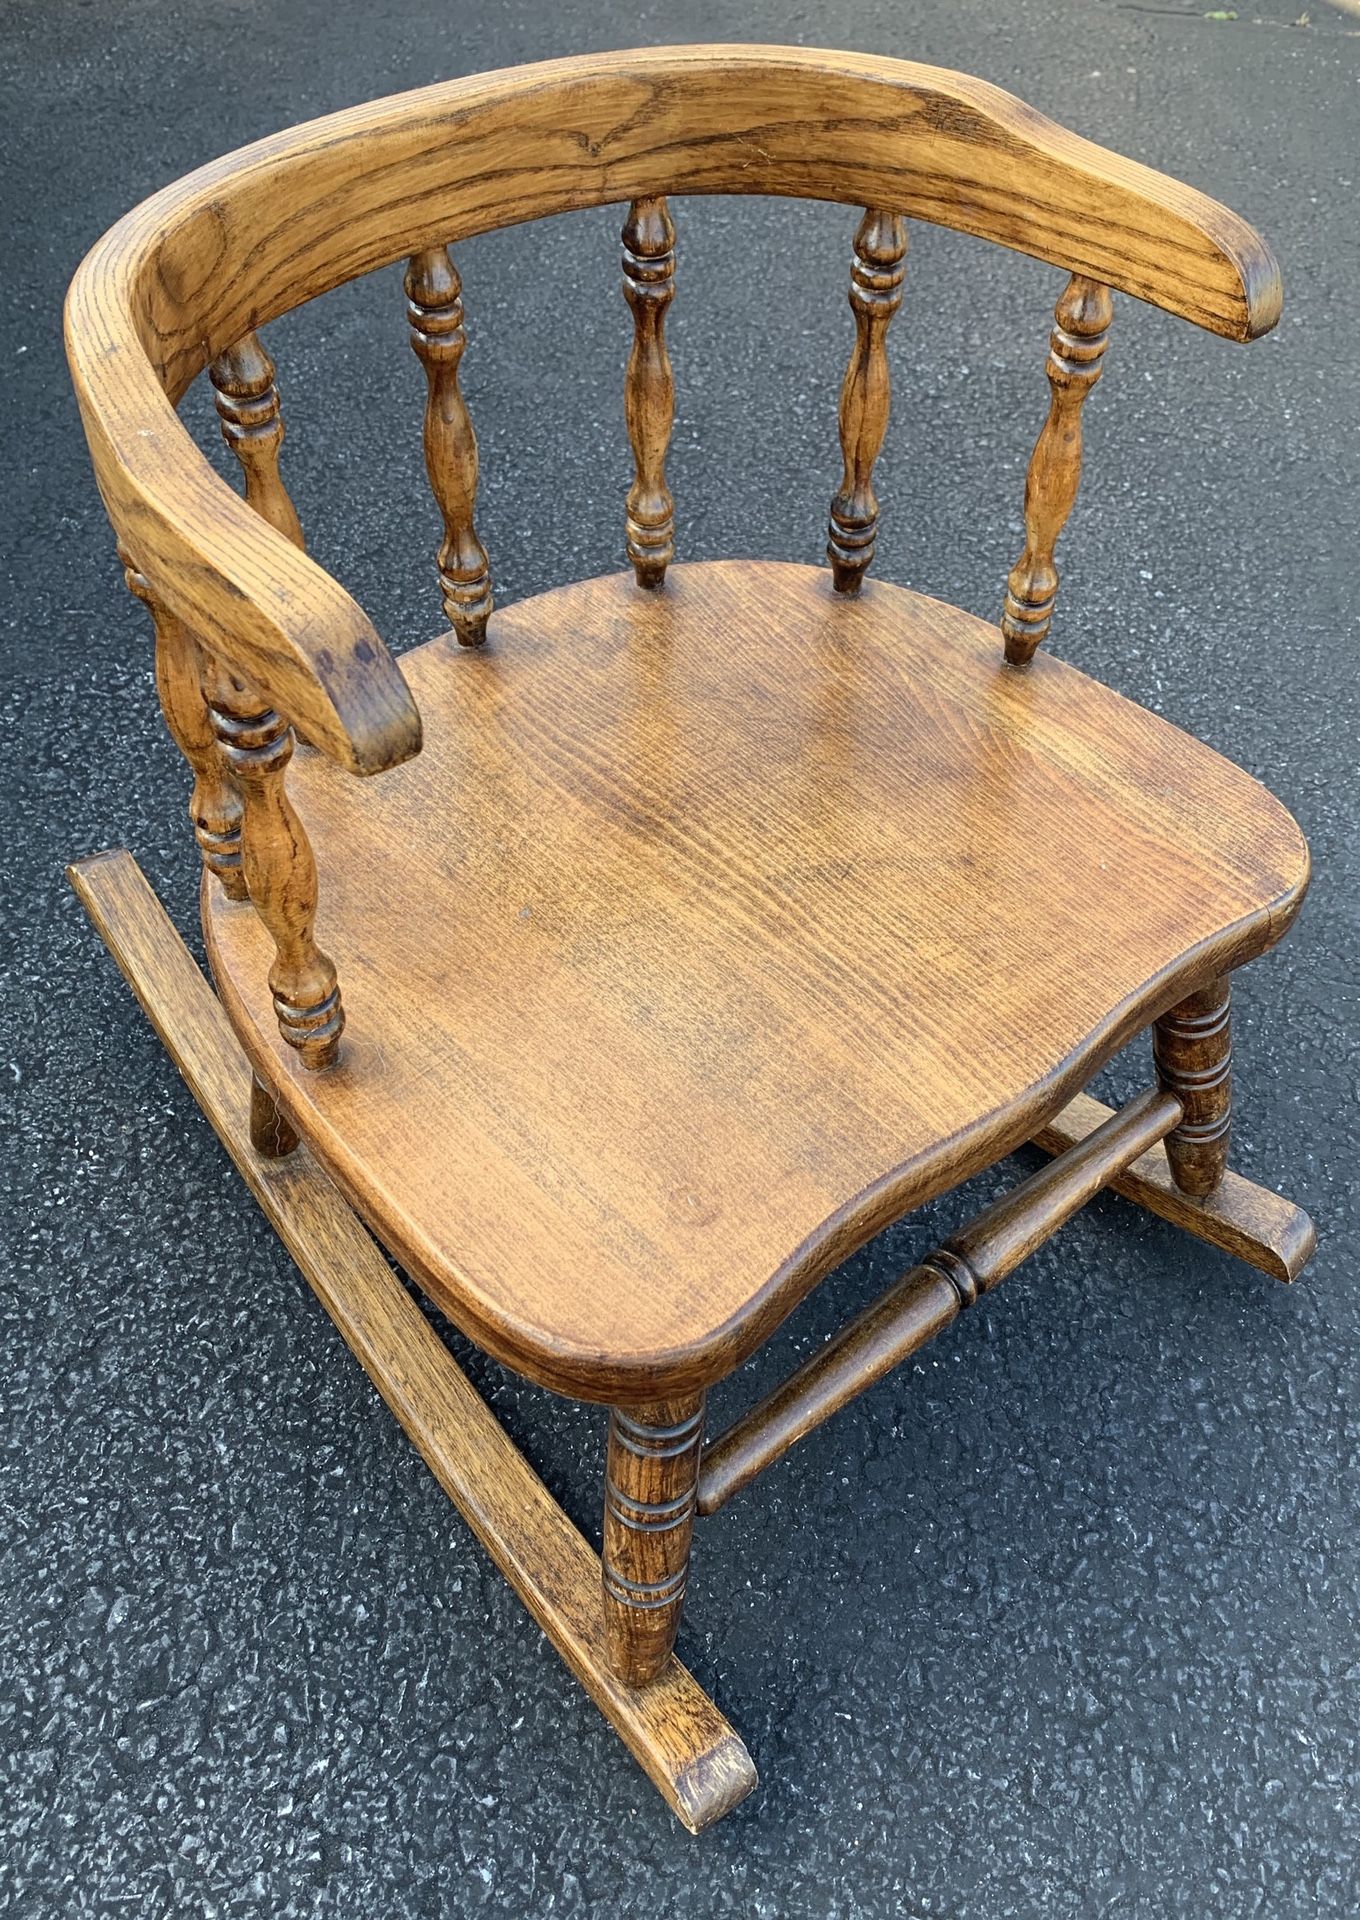 Antique, wooden, toddler-size rocking chair.